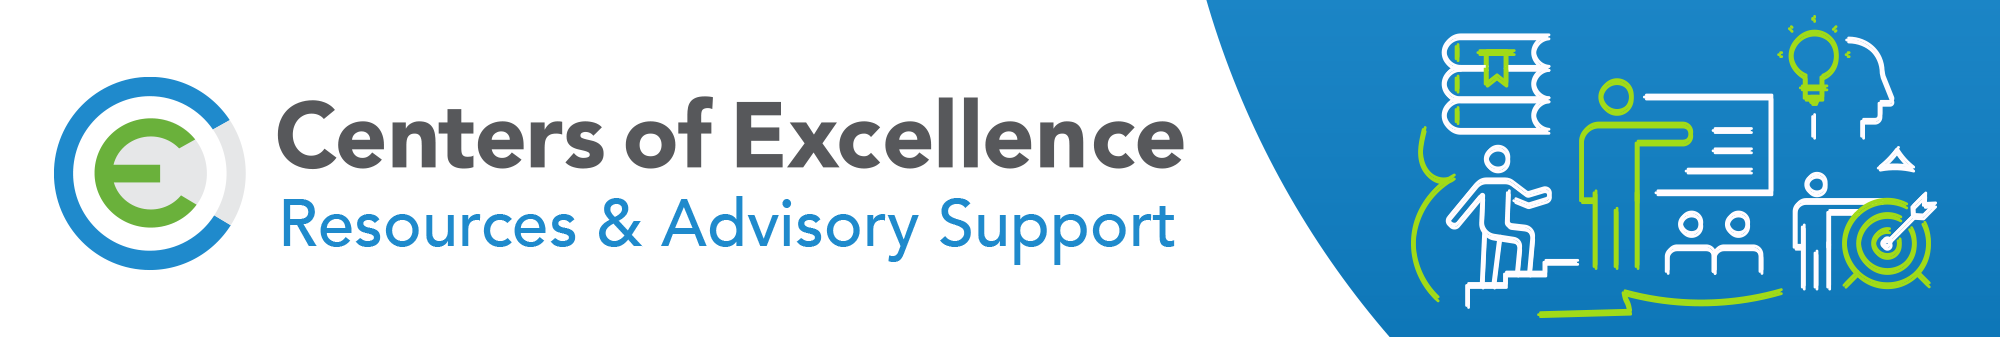 CoE Resources and Advisory Support Banner